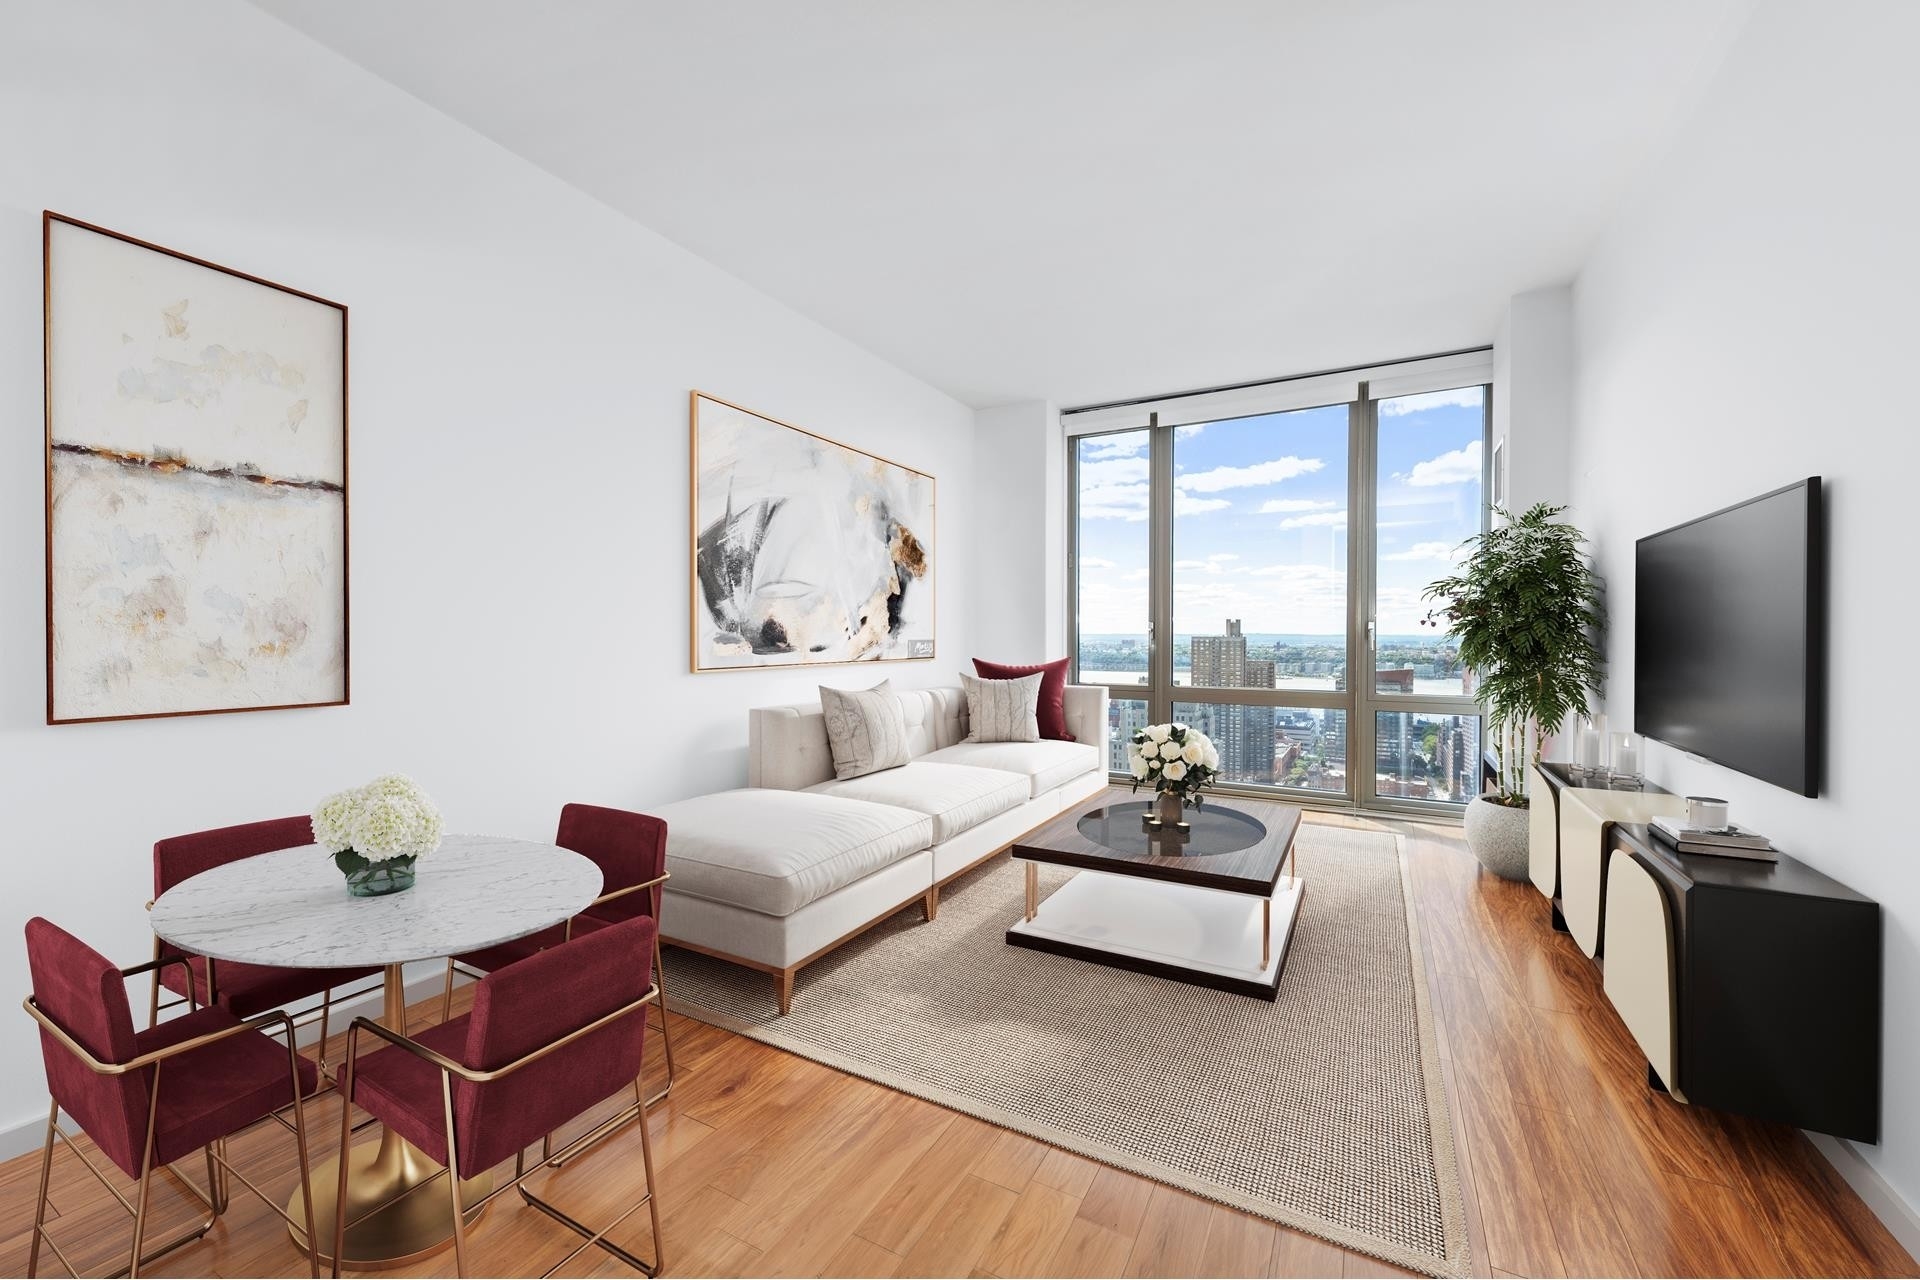 Condominium for Sale at The Link, 310 W 52ND ST, 33C Hell's Kitchen, New York, NY 10019